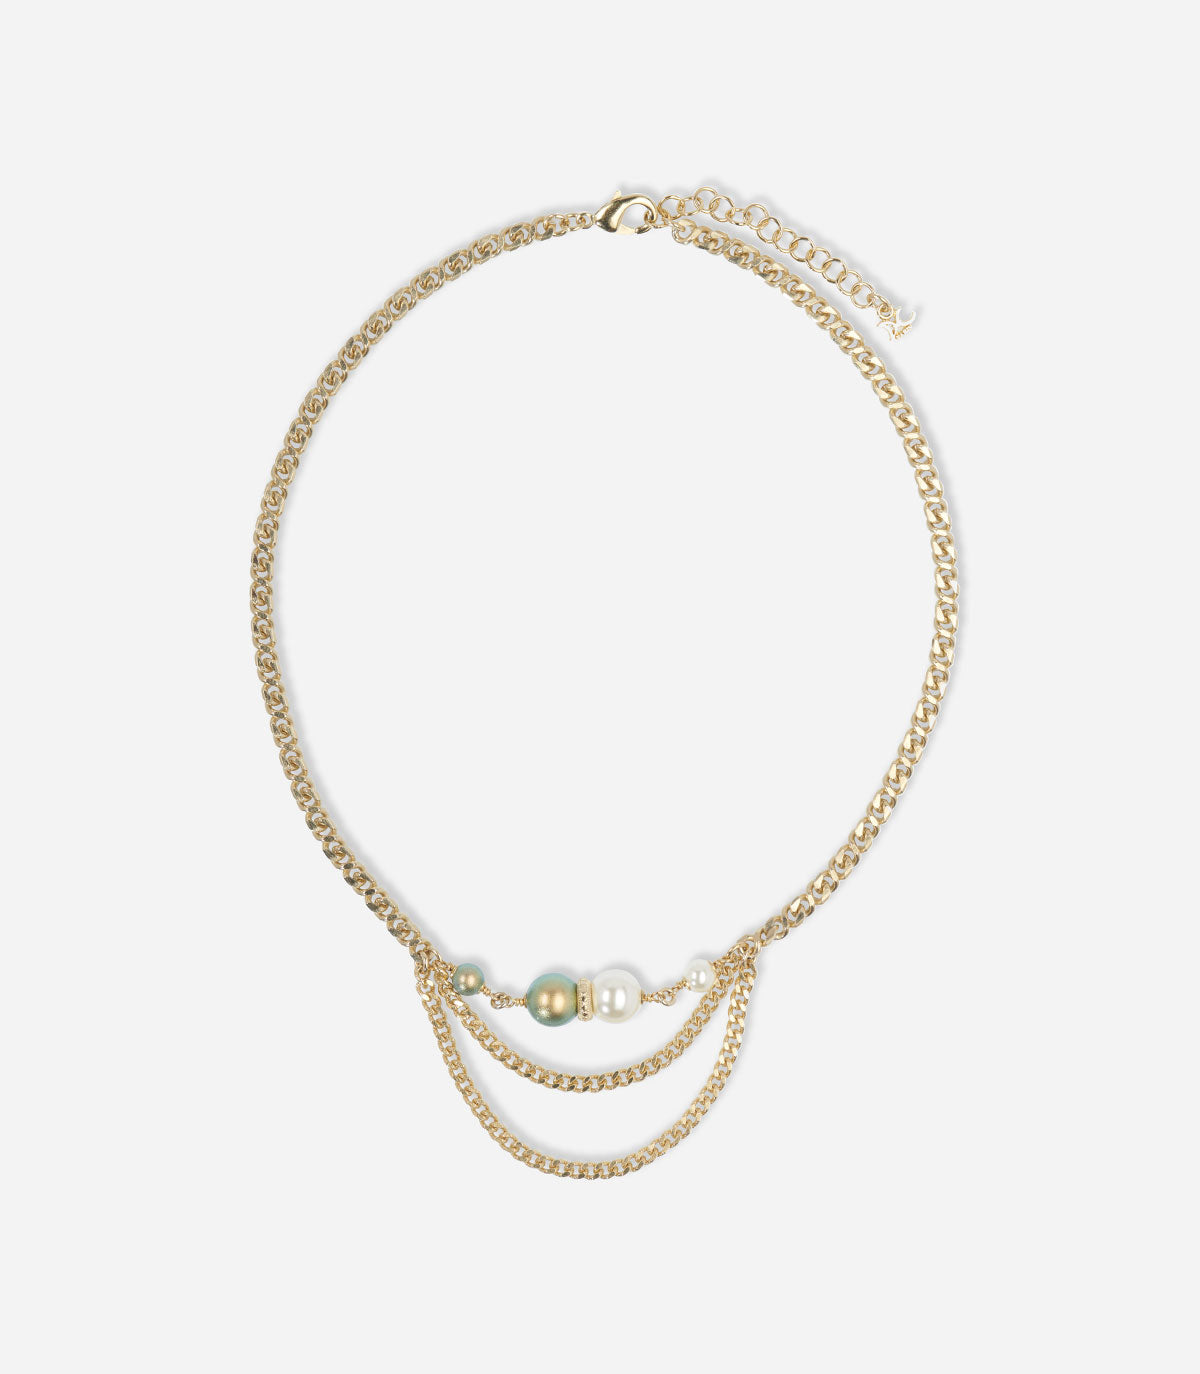 SHEEANA CHAINS & PEARLS NECKLACE - Collier - Delphine-Charlotte Parmentier